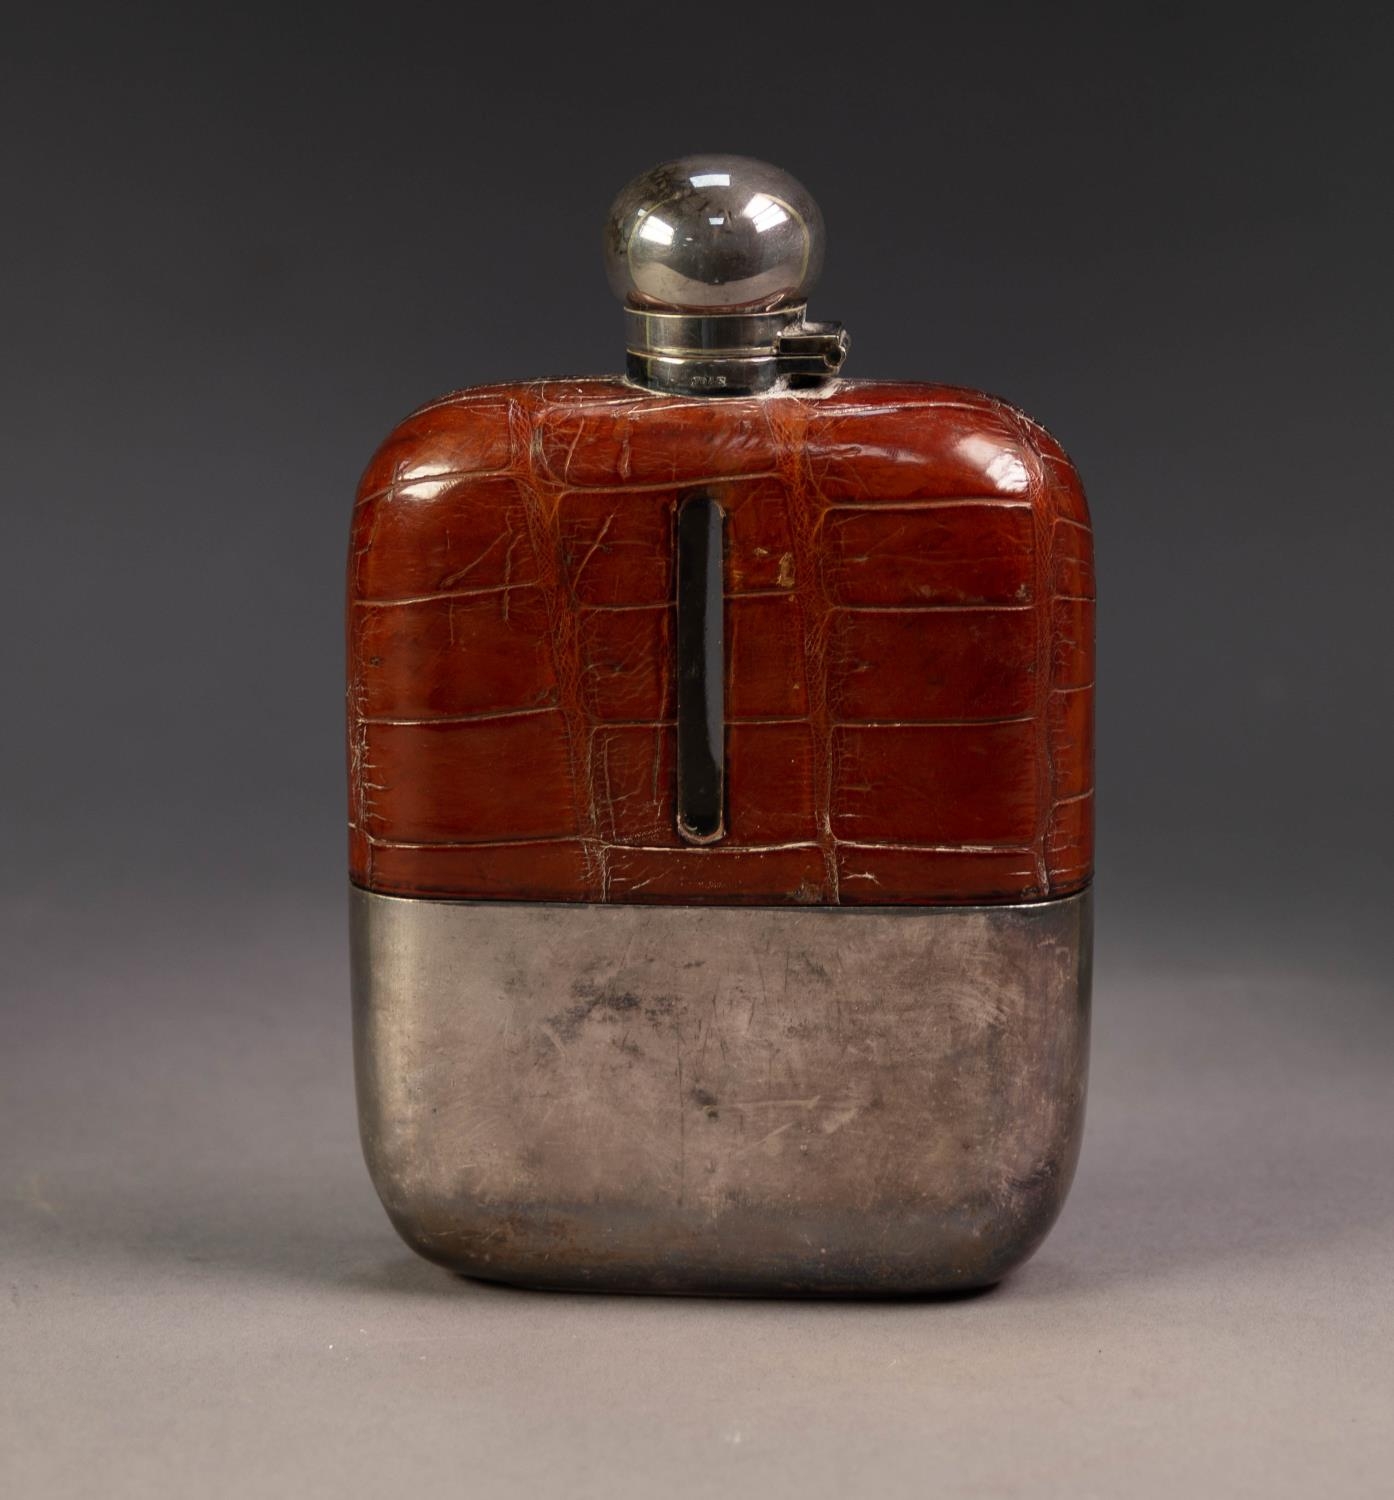 GOOD CROCODILE SKIN CLAD LARGE, 5/8 PINT GLASS HIP FLASK WITH PULL-OFF ELECTROPLATED BASE BY JAMES - Image 2 of 3